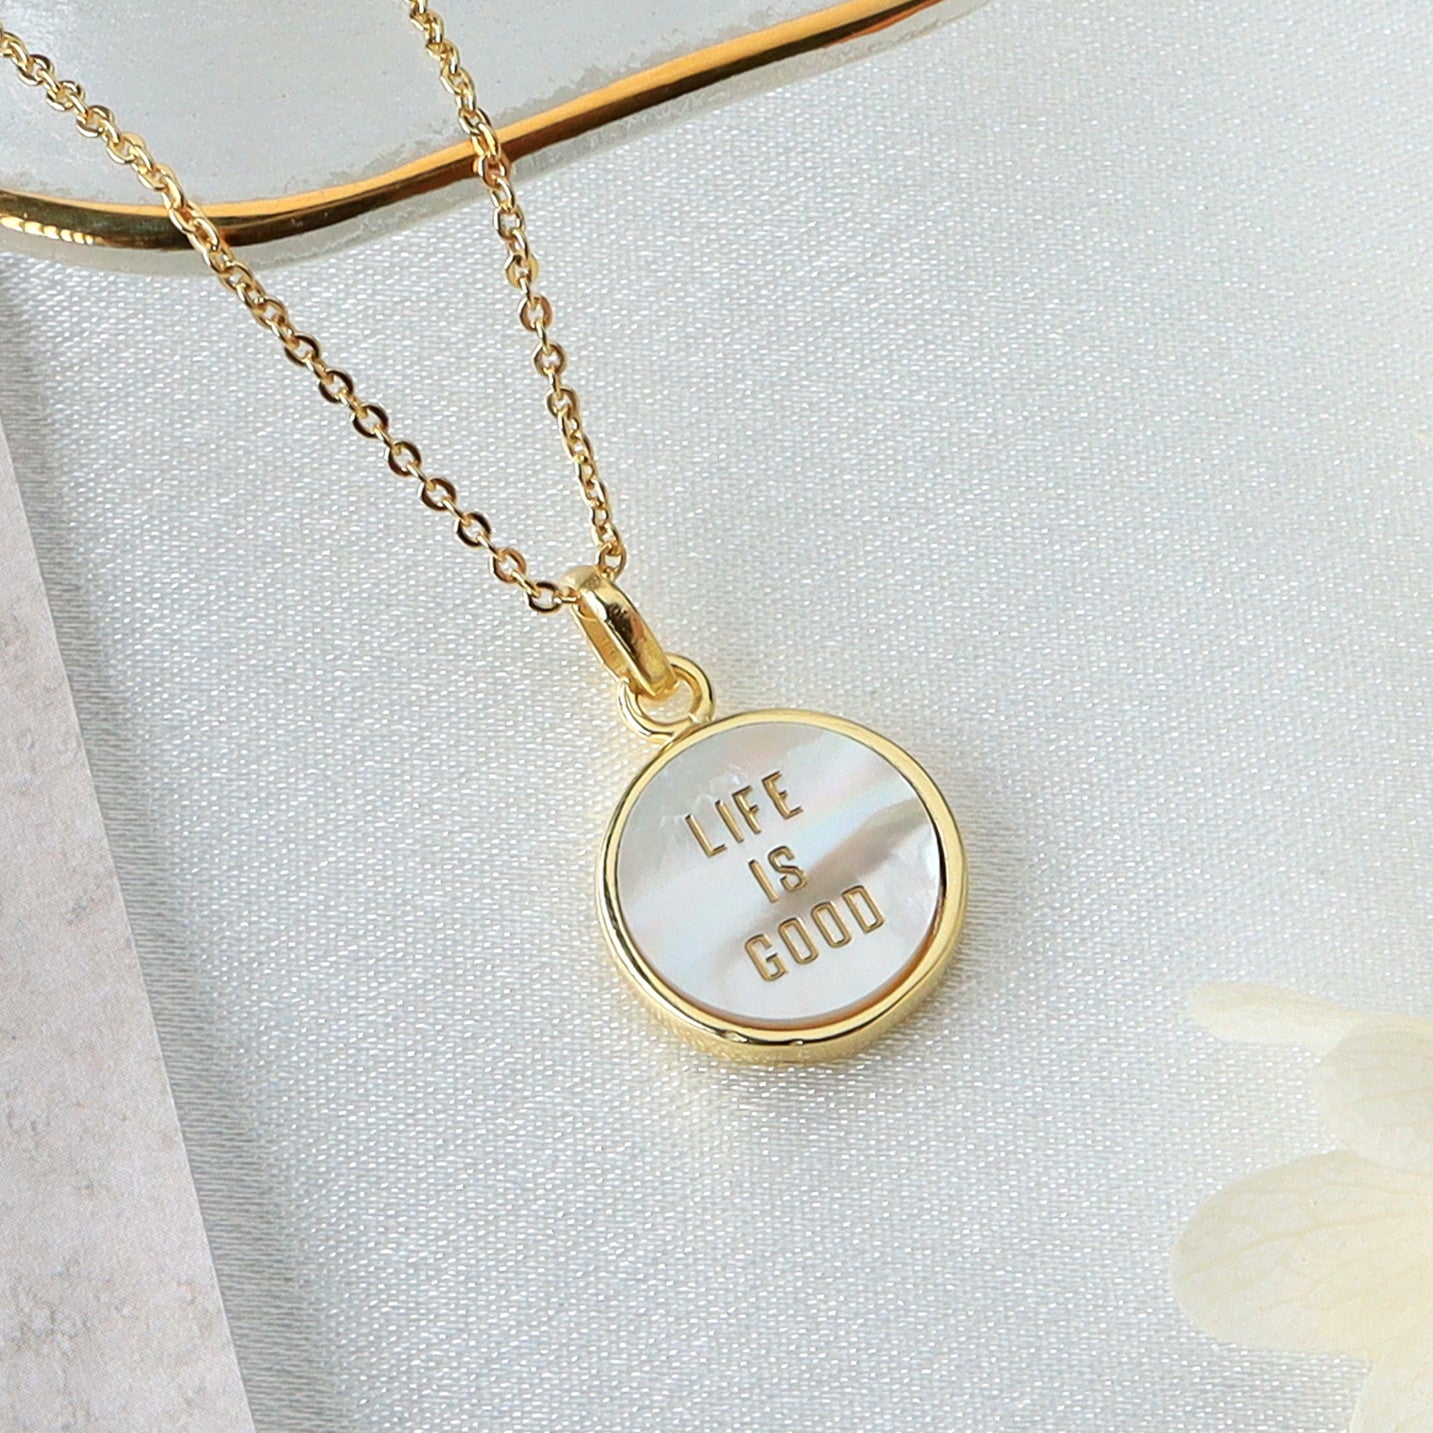 Wholesale Gold Plated Round White Shell Carved Letter Pendant Necklace, Customized Letters, Natural Shell Coin Jewelry KZ011